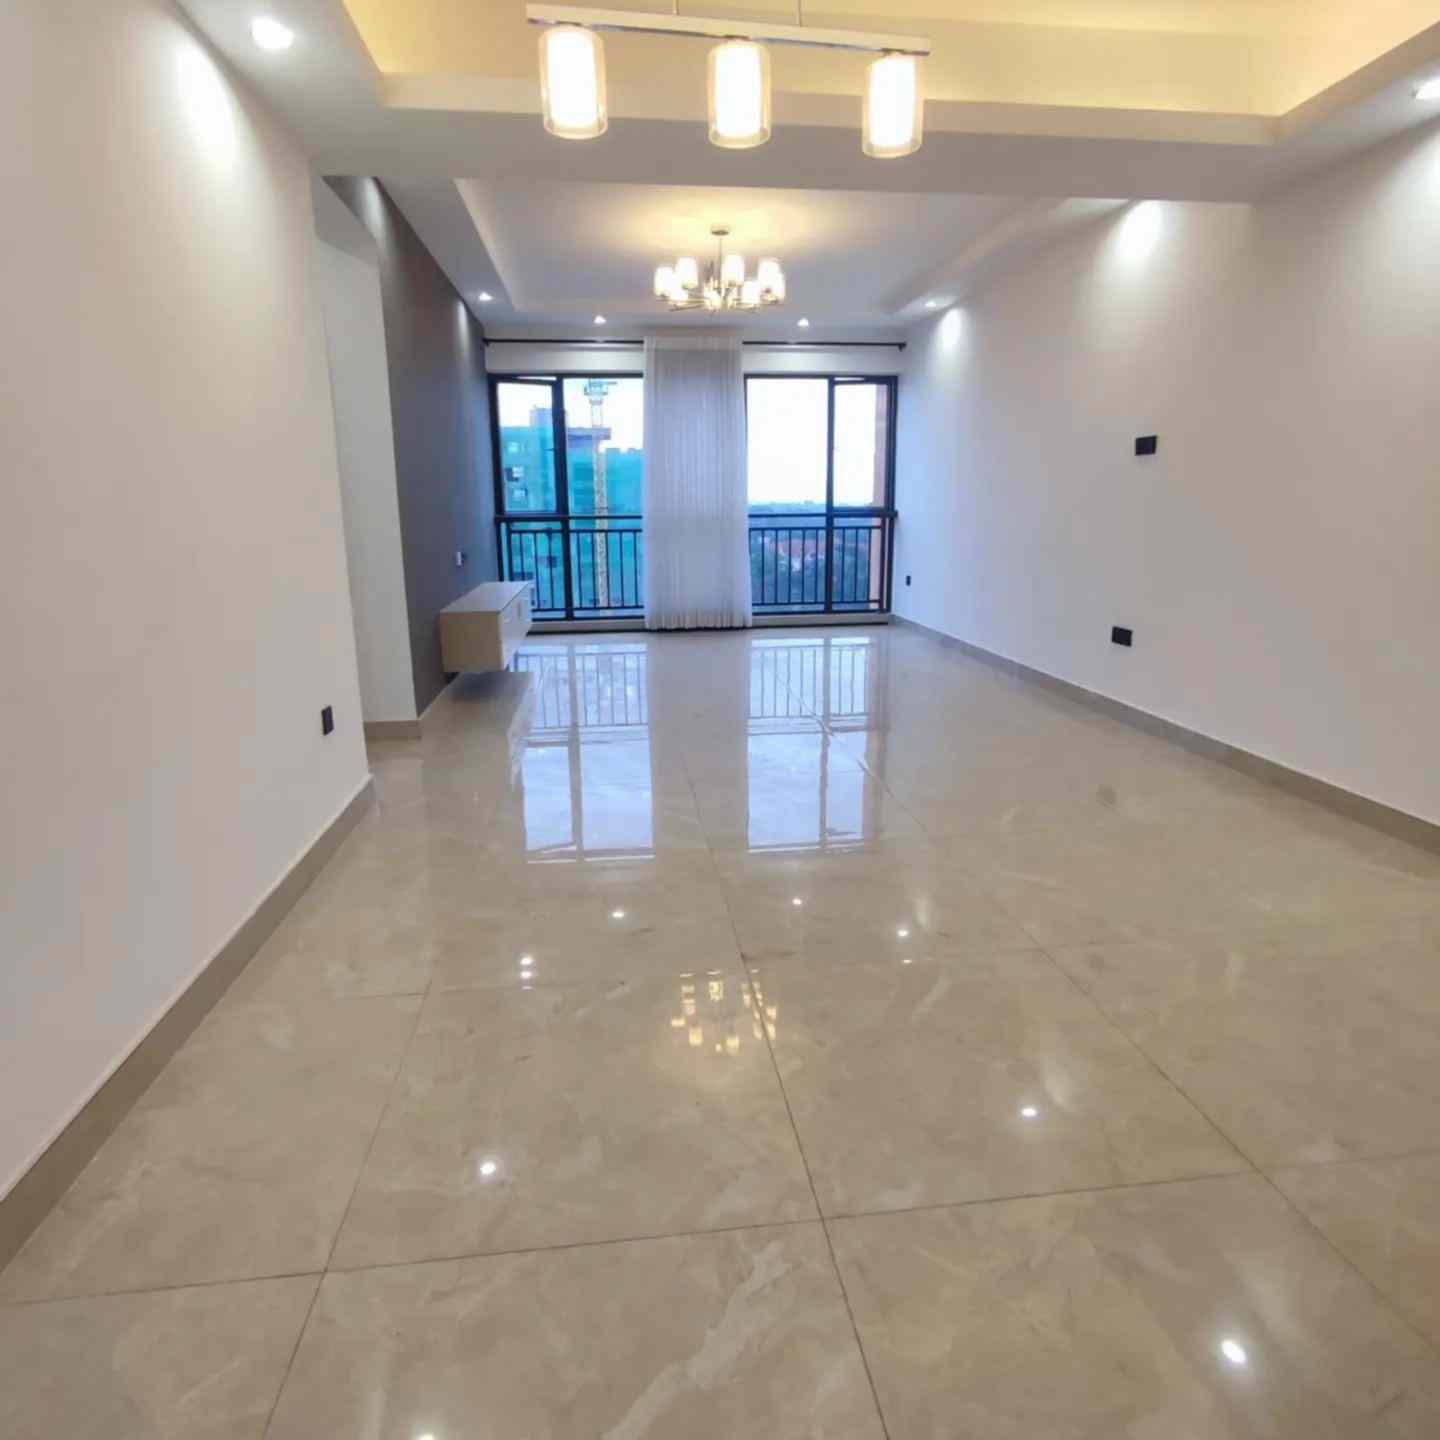 3 and 4 bedroom apartment for rent in Lavington